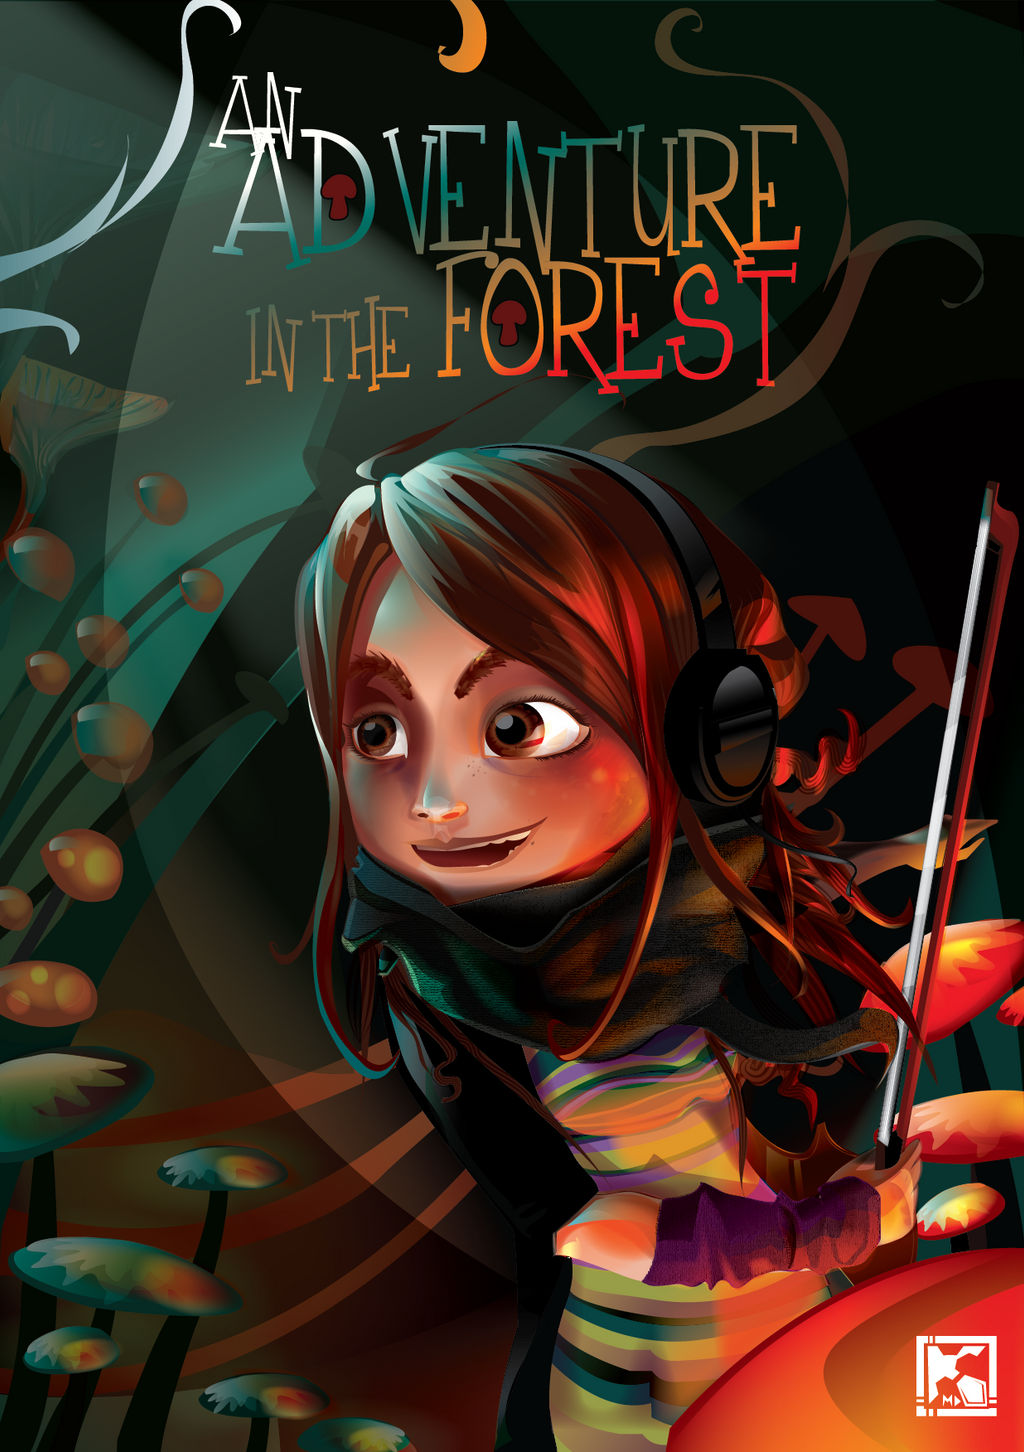 An adventure in the forest